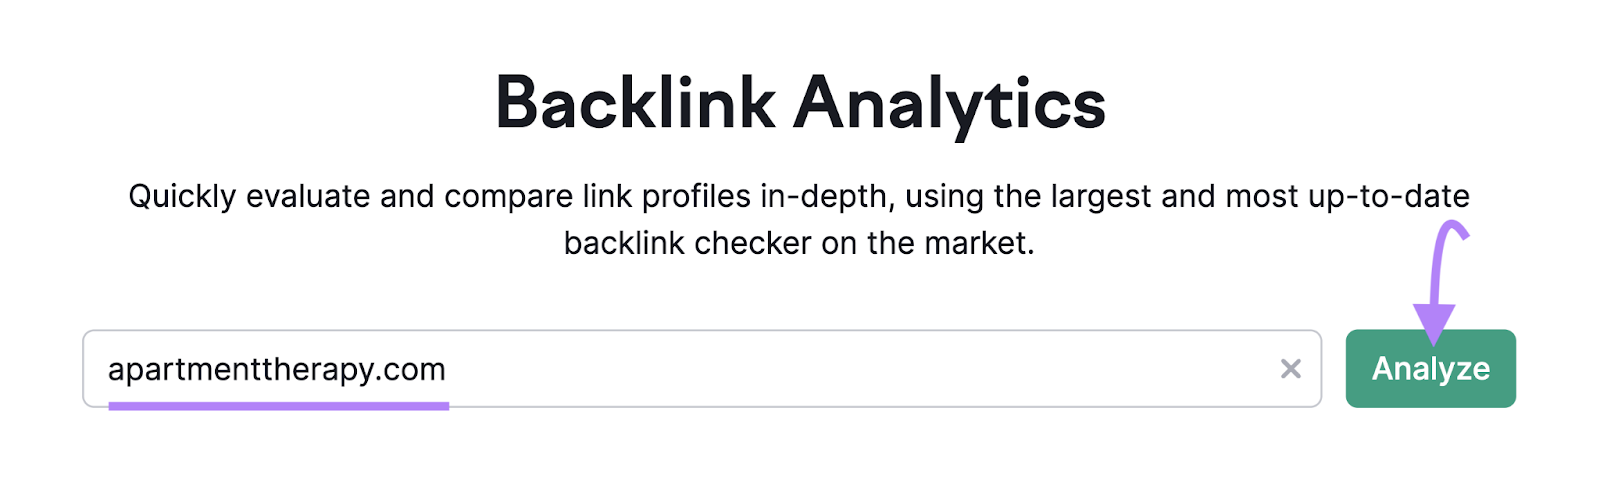 "apartmenttherapy.com" entered into the Backlink Analytics hunt  bar